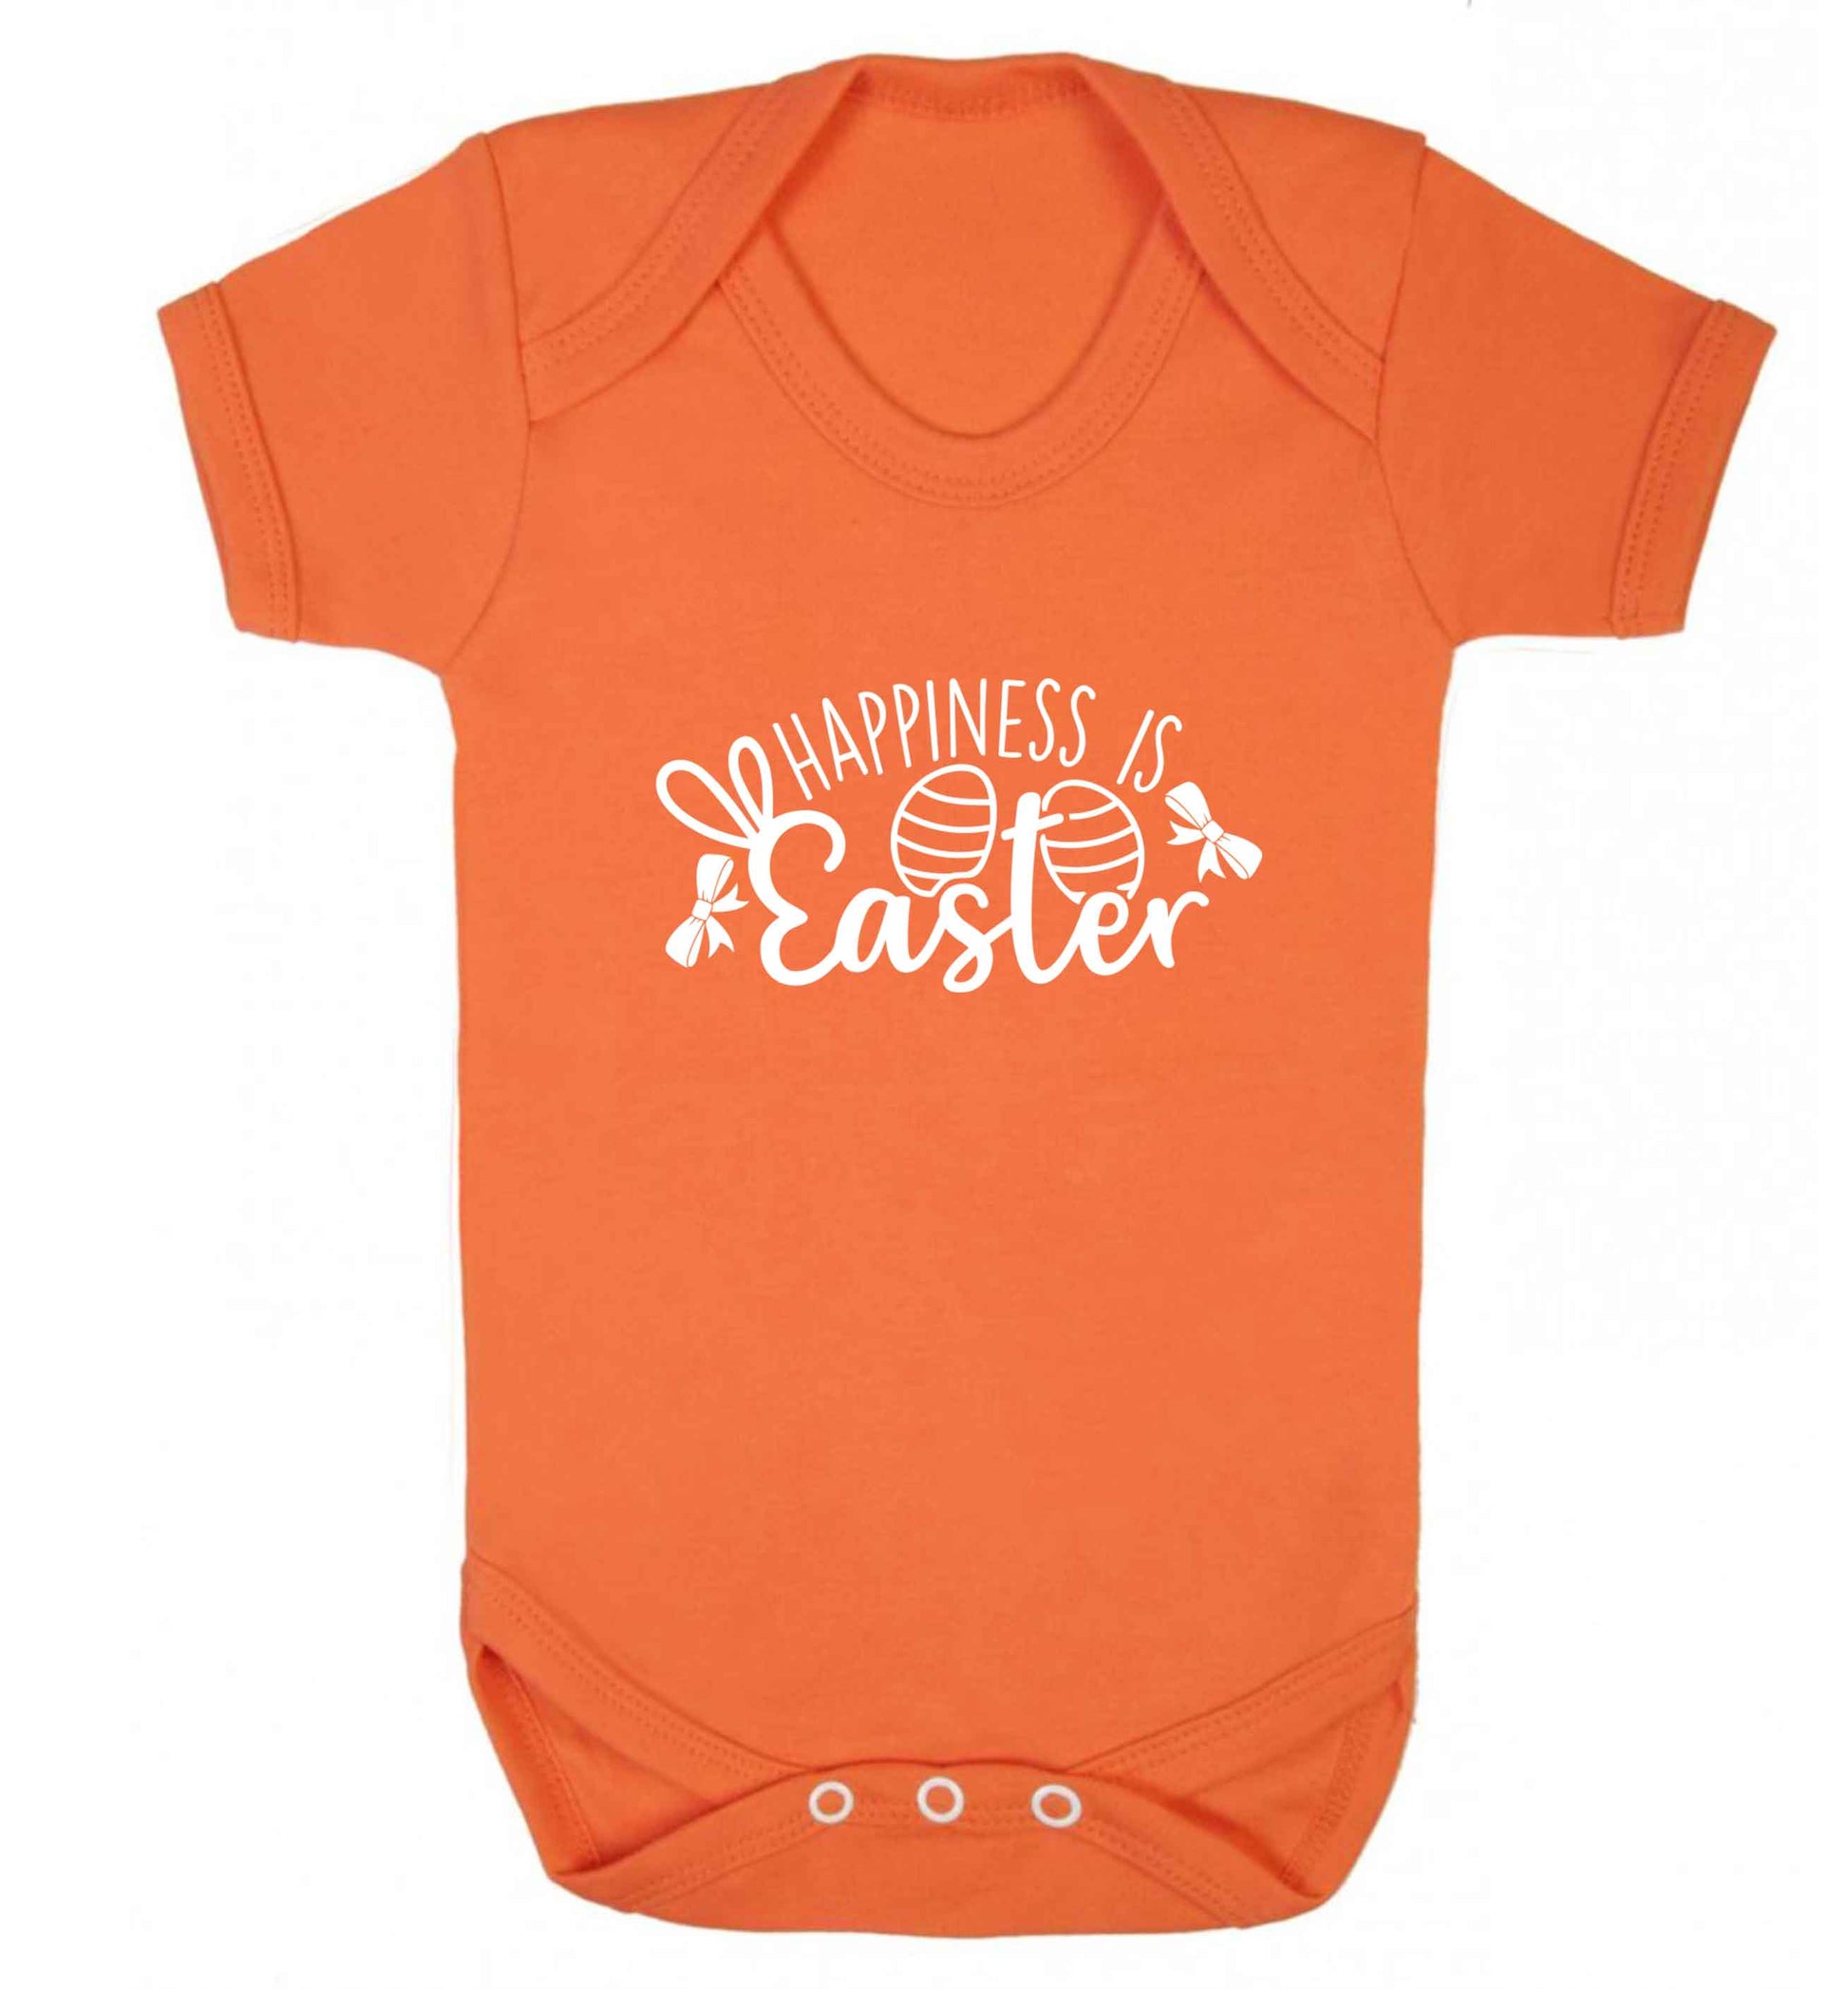 Happiness is easter baby vest orange 18-24 months